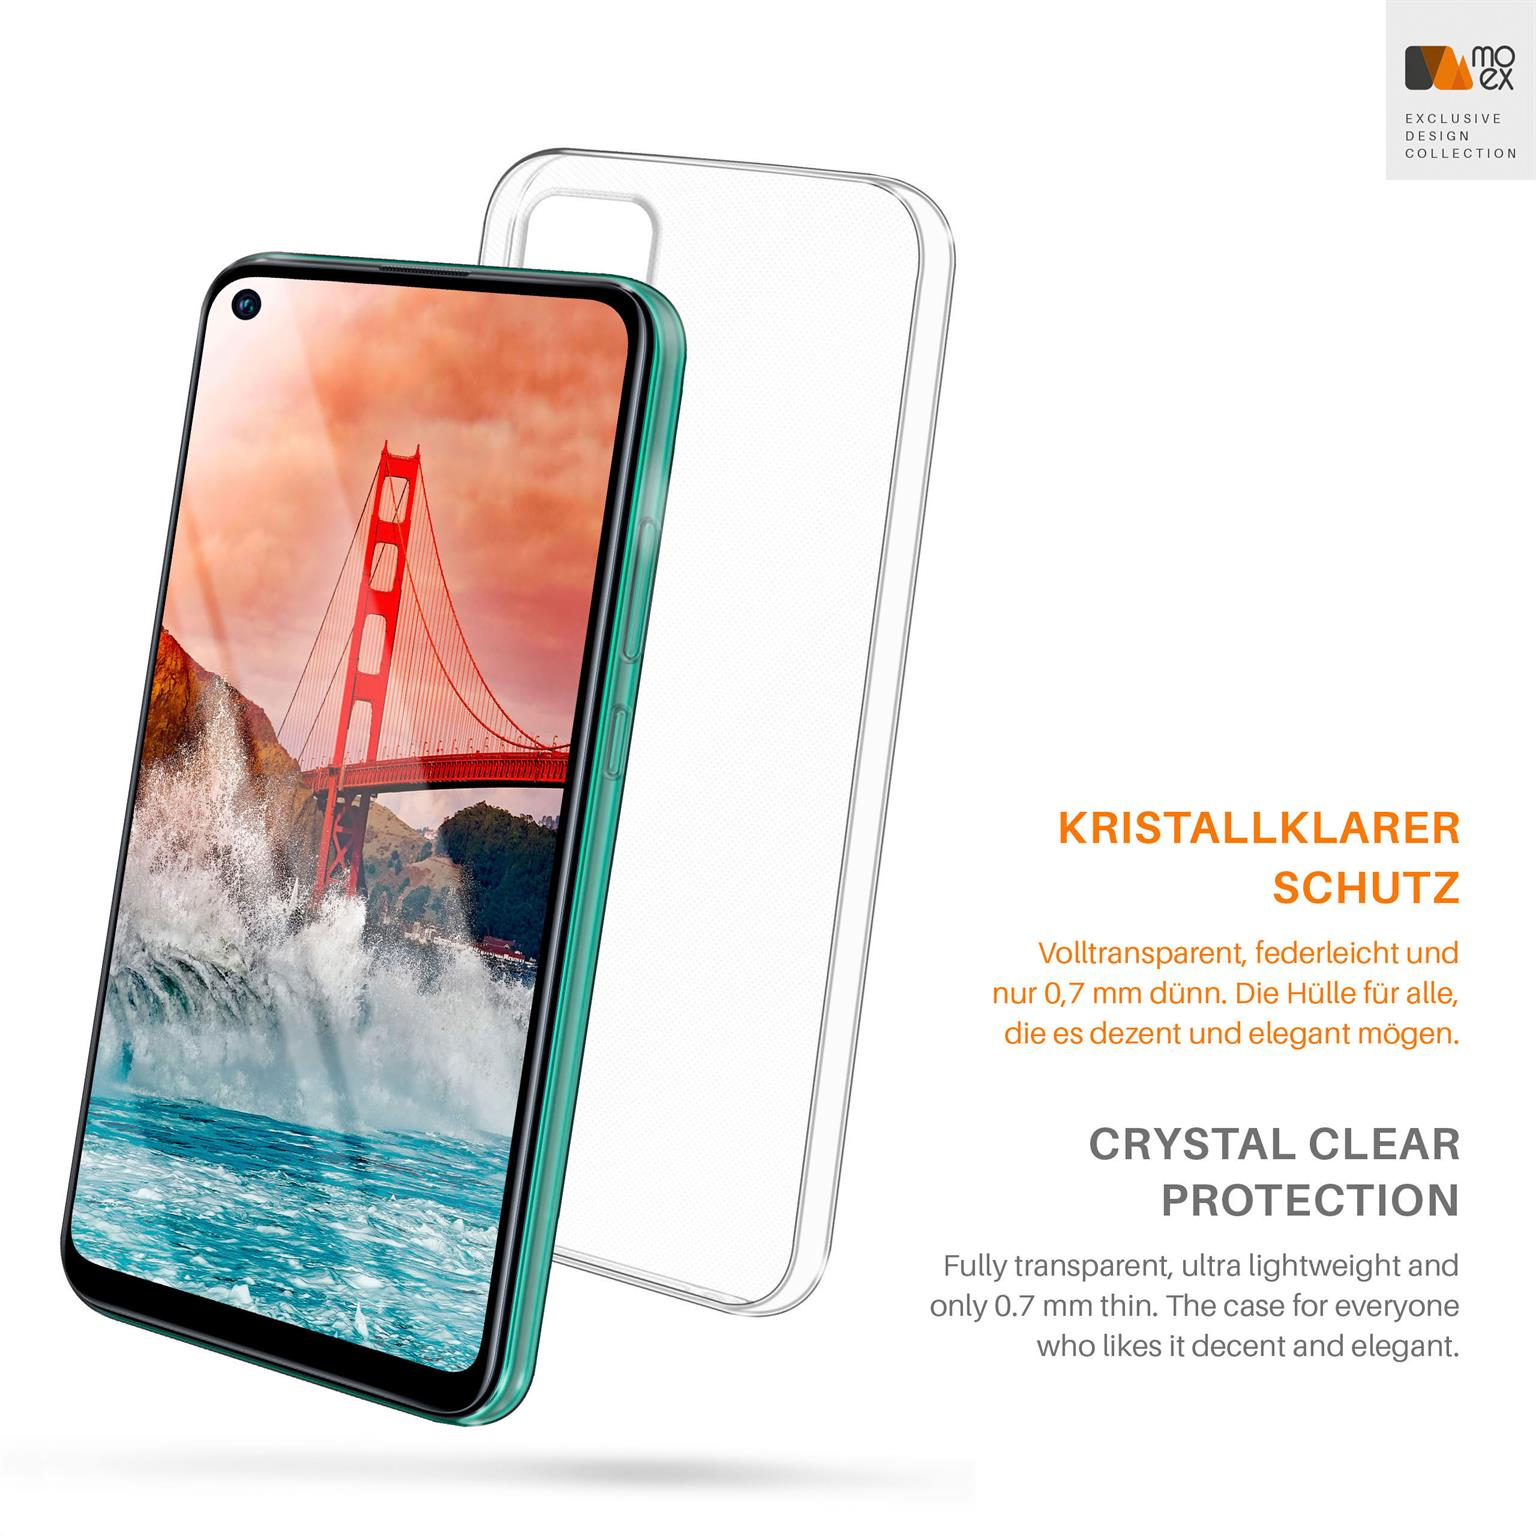 Backcover, Lite, P40 Huawei, MOEX Crystal-Clear Aero Case,